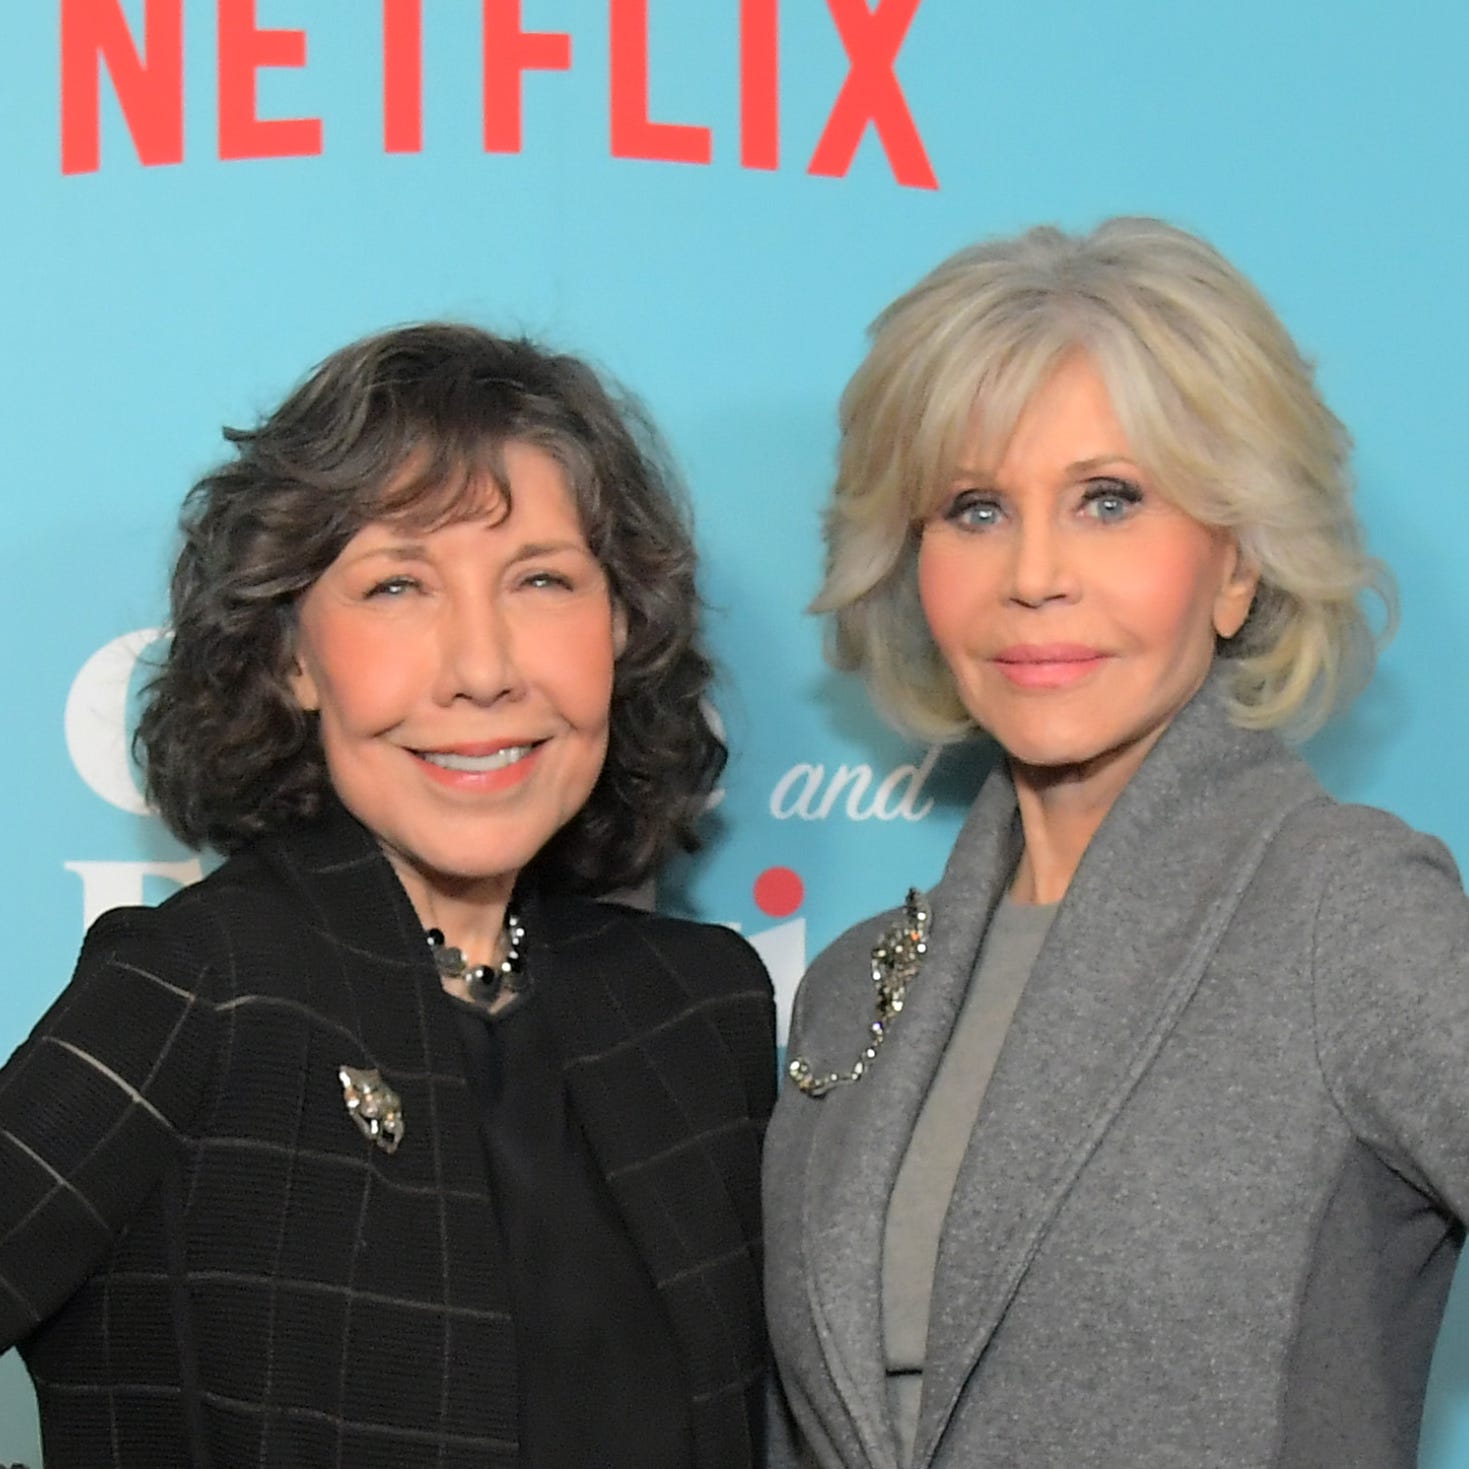 LOS ANGELES, CALIFORNIA - JANUARY 15: (L-R) Lily Tomlin and Jane Fonda attend a special screening of "Grace and Frankie Season 6", presented by Netflix, on January 15, 2020 in Los Angeles, California. (Photo by Charley Gallay/Getty Images for Netflix) ORG XMIT: 775456956 ORIG FILE ID: 1199817510